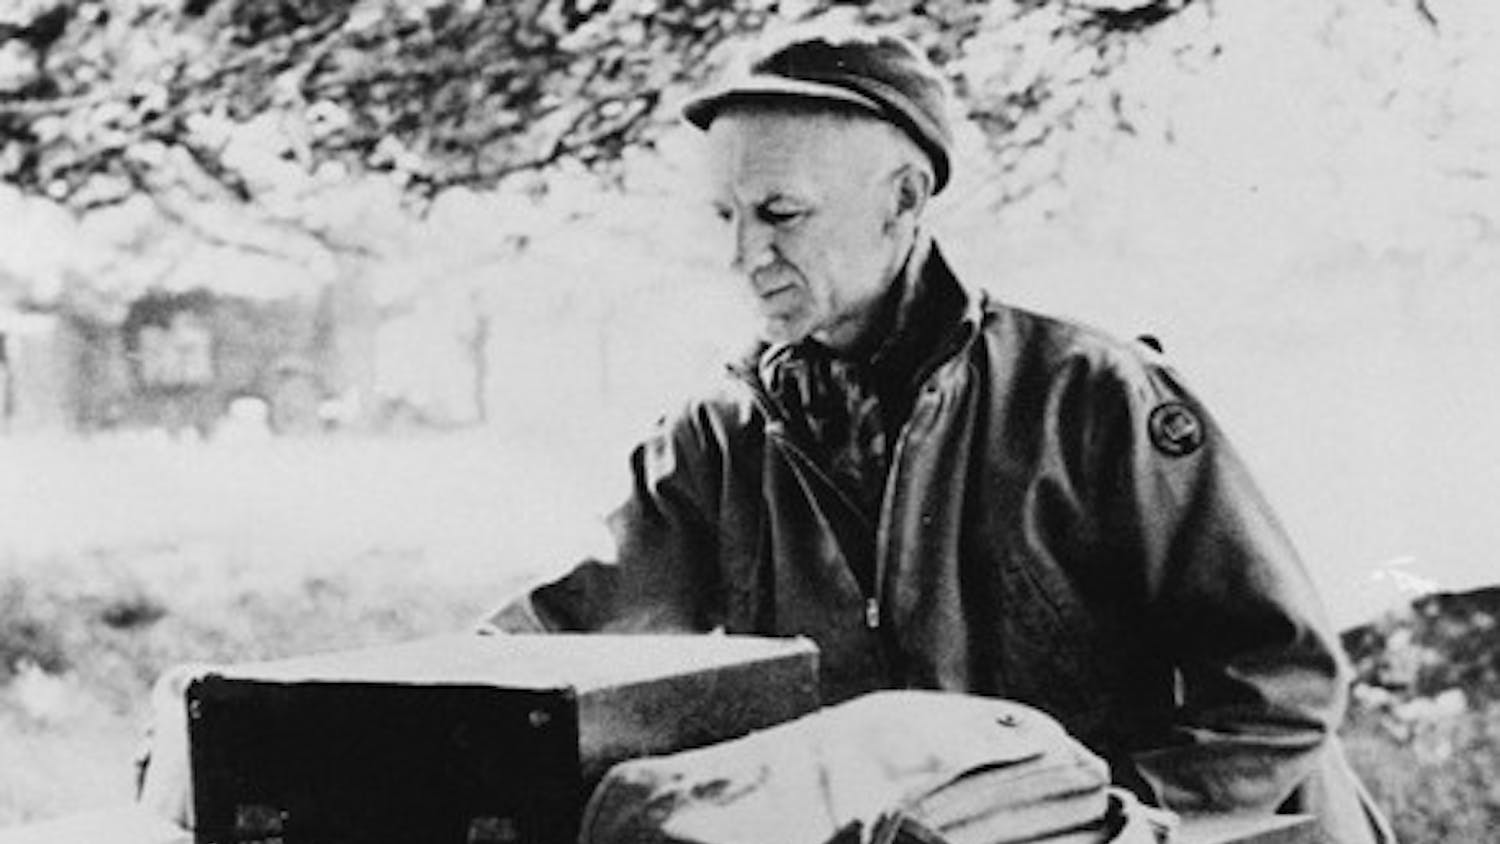 Sens. Todd Young, R-Indiana, and Joe Donnelly, D-Indiana, announced a resolution to designate Aug. 3, 2018, National Ernie Pyle Day. Ernie Pyle was a journalism student at IU and was a war correspondent during World War II.